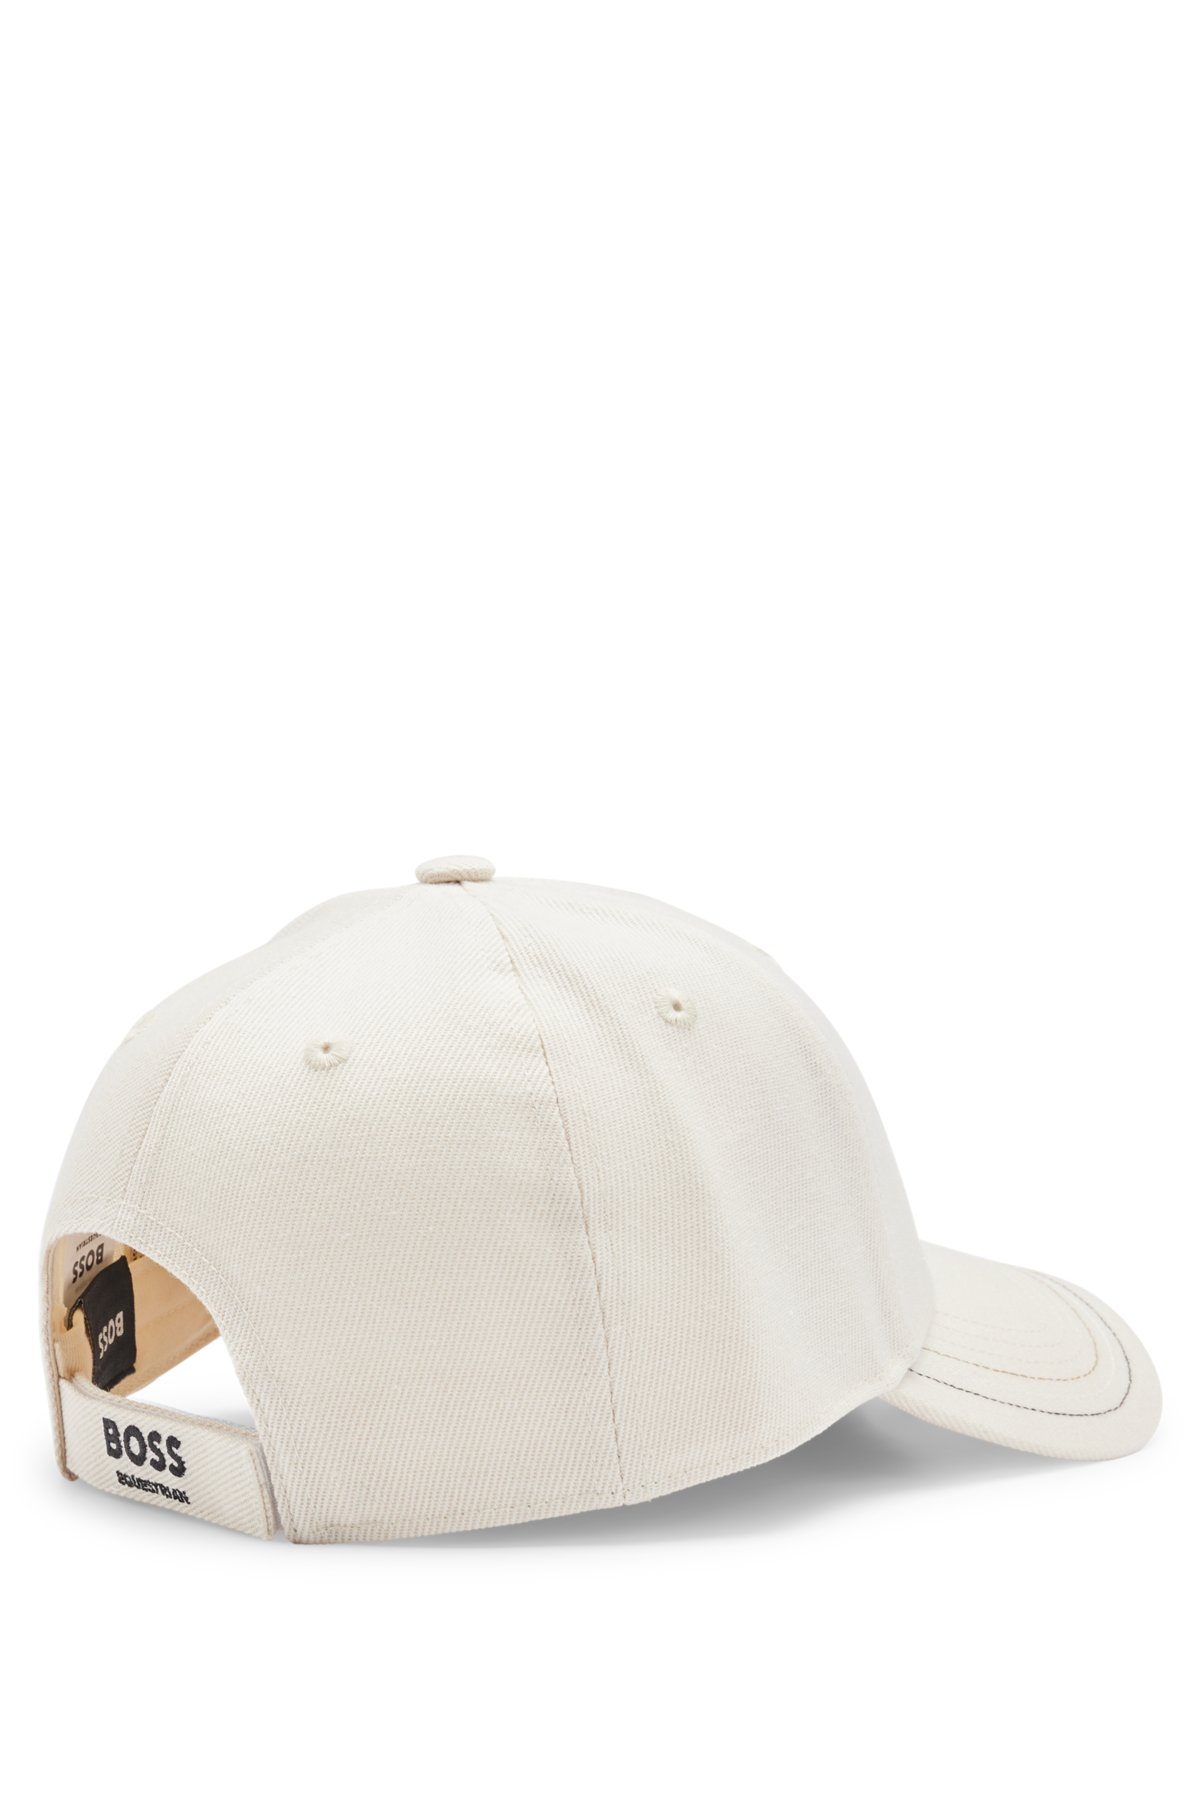 BOSS - Equestrian logo cap details five-panel with